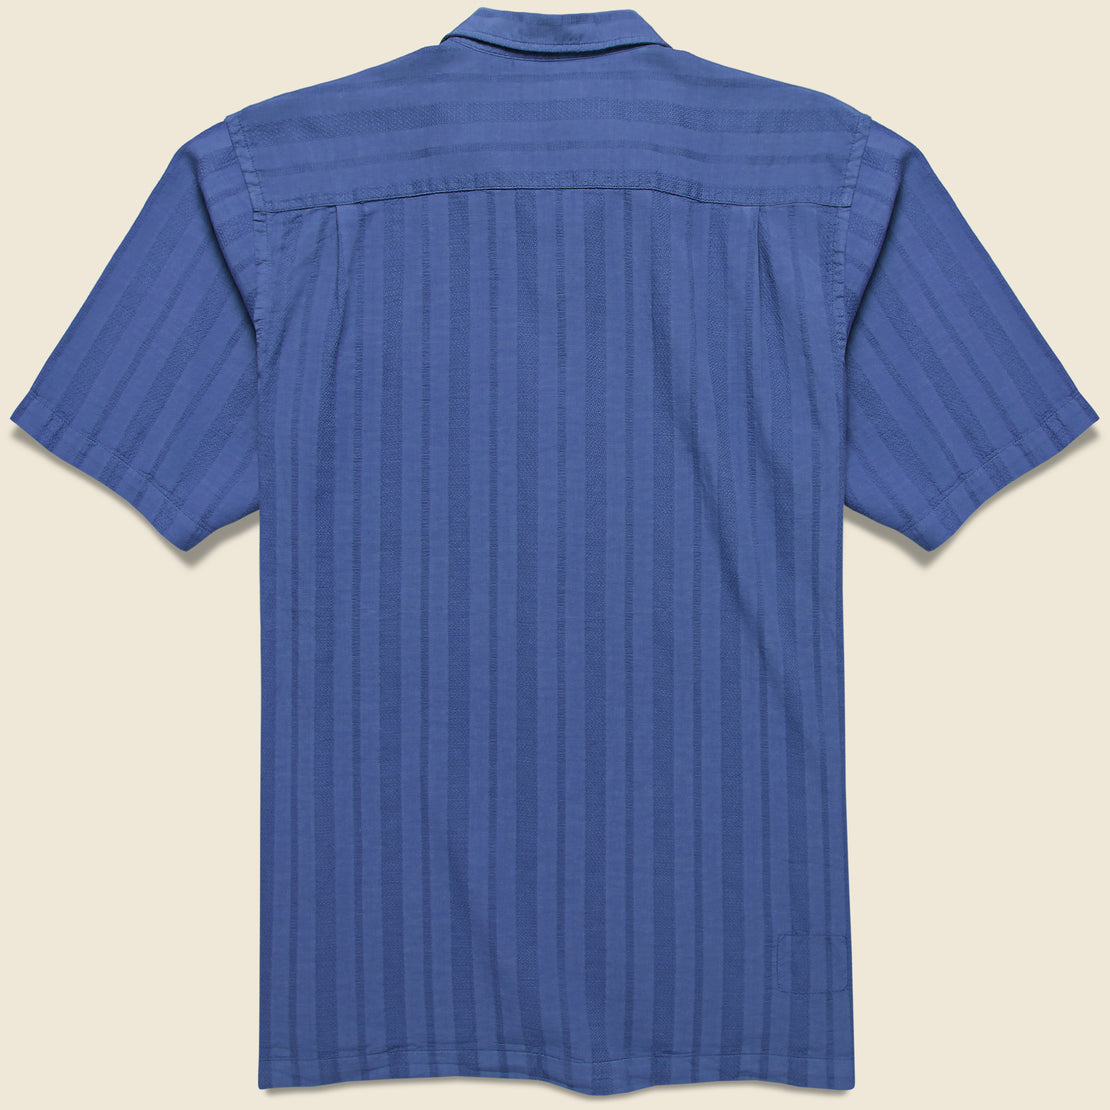 Flag Self Stripe Camp Shirt - Blue - Universal Works - STAG Provisions - Tops - S/S Woven - Solid